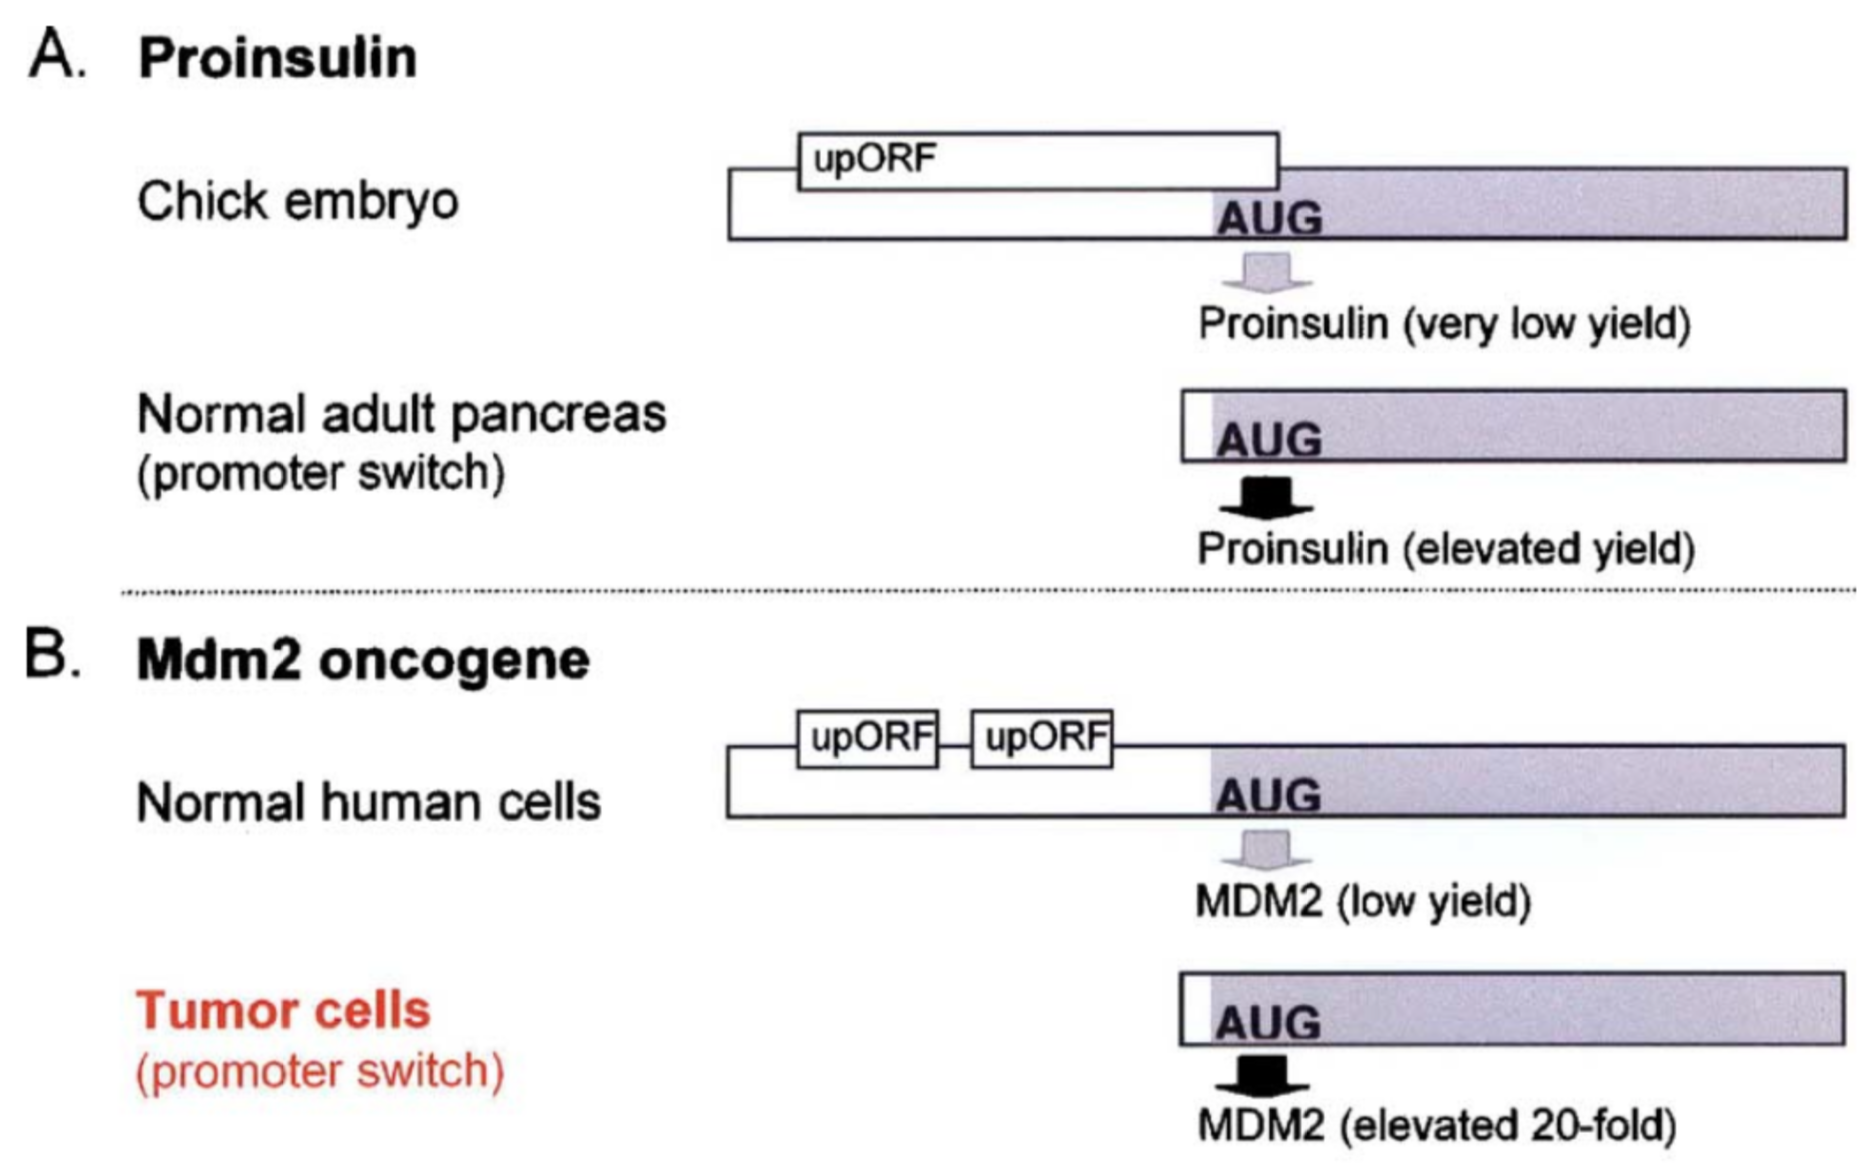 Paraphrased from Kozak, 2005. Small upstream ORFs or uORFs are thought to down-regulate translation by imposing an inefficient reinitiation mechanism. This constraint on translation ensures against harmful overproduction of potent or toxic proteins. Two examples are described here. A) The presence of an overlapping uORF allows only low-level production of proinsulin in chick embryos. In the adult pancreas where more proinsulin protein is needed, a more efficiently translated form of mRNA is produced via a downstream promoter. B) The human mdm2 oncogene has the ability to cause cancer when it is overexpressed. Overexpression of the mdm2 oncogene in tumor cells is caused by a switch in the transcriptional start site which eliminates two small uORFs, thereby elevating translation 20-fold. The first example illustrates a naturally occuring, developmental switch in gene expression. The second example only occurs in the disease state. In fact, the expression from the crytpic downstream promoter results from the presence of a p53-responsive promoter region that is preferentially utilized when p53 levels increase, a common occurance in tumor cells (Landers 1997)